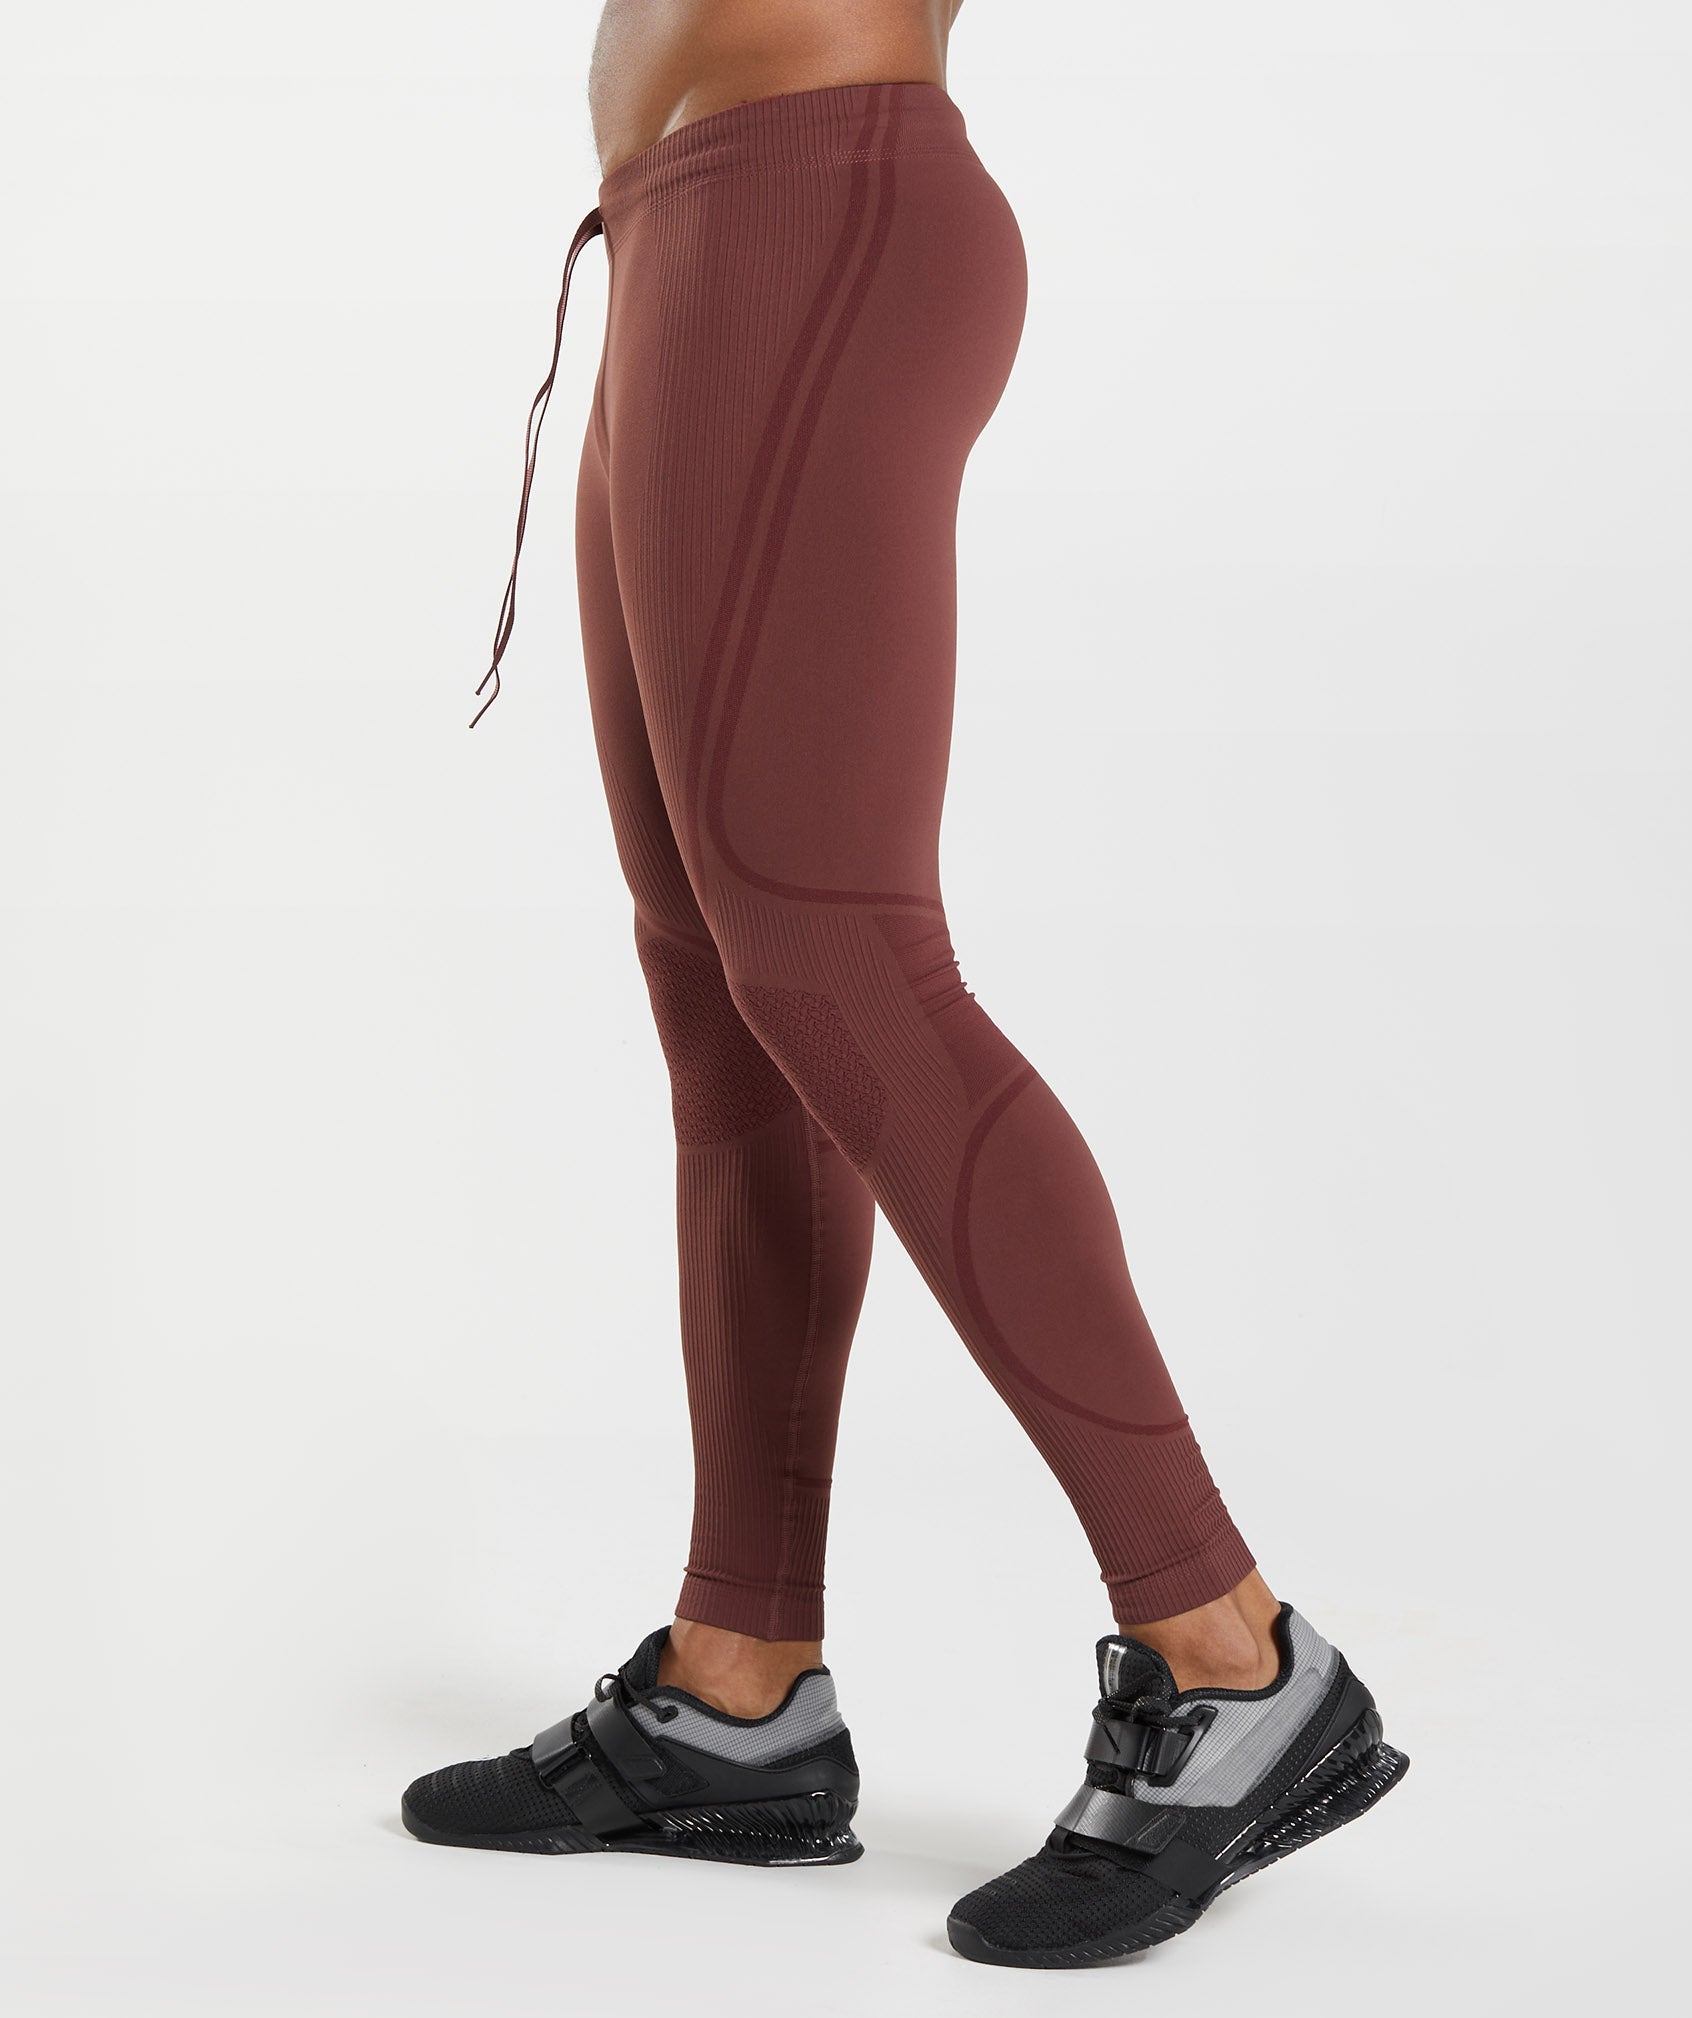 315 Seamless Tights in Cherry Brown/Athletic Maroon